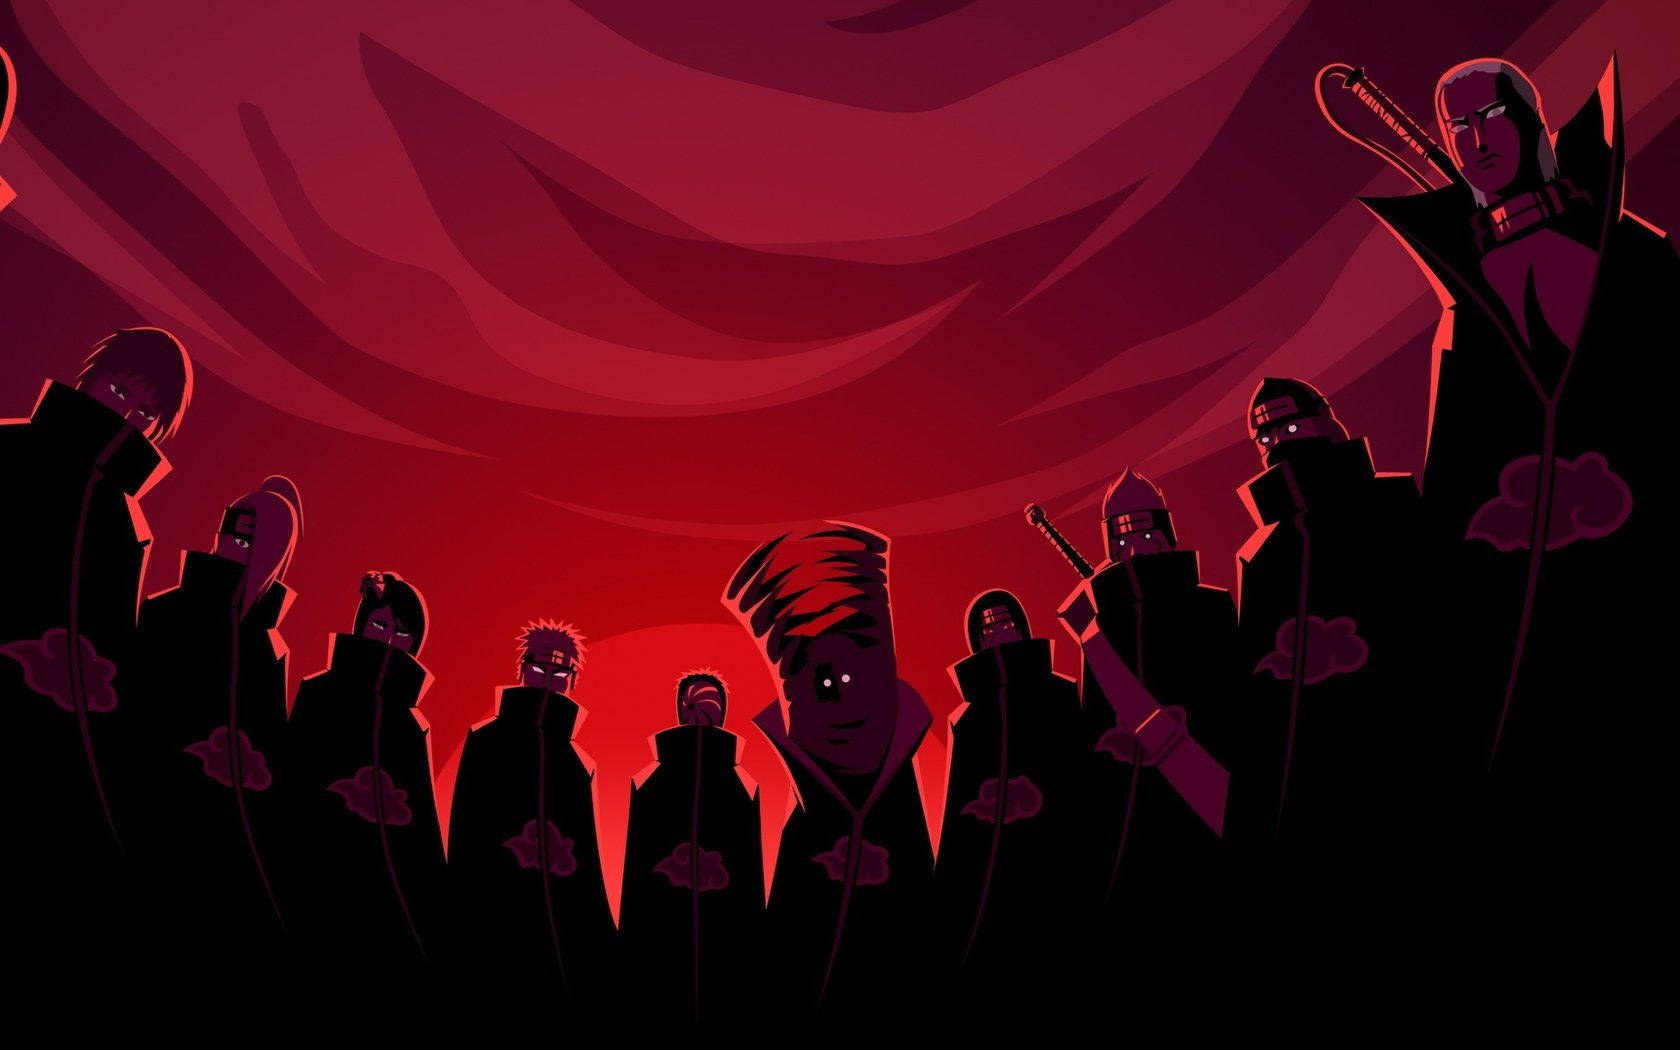 "Pain, The Akatsuki Leader and Master of the Six Paths" Wallpaper